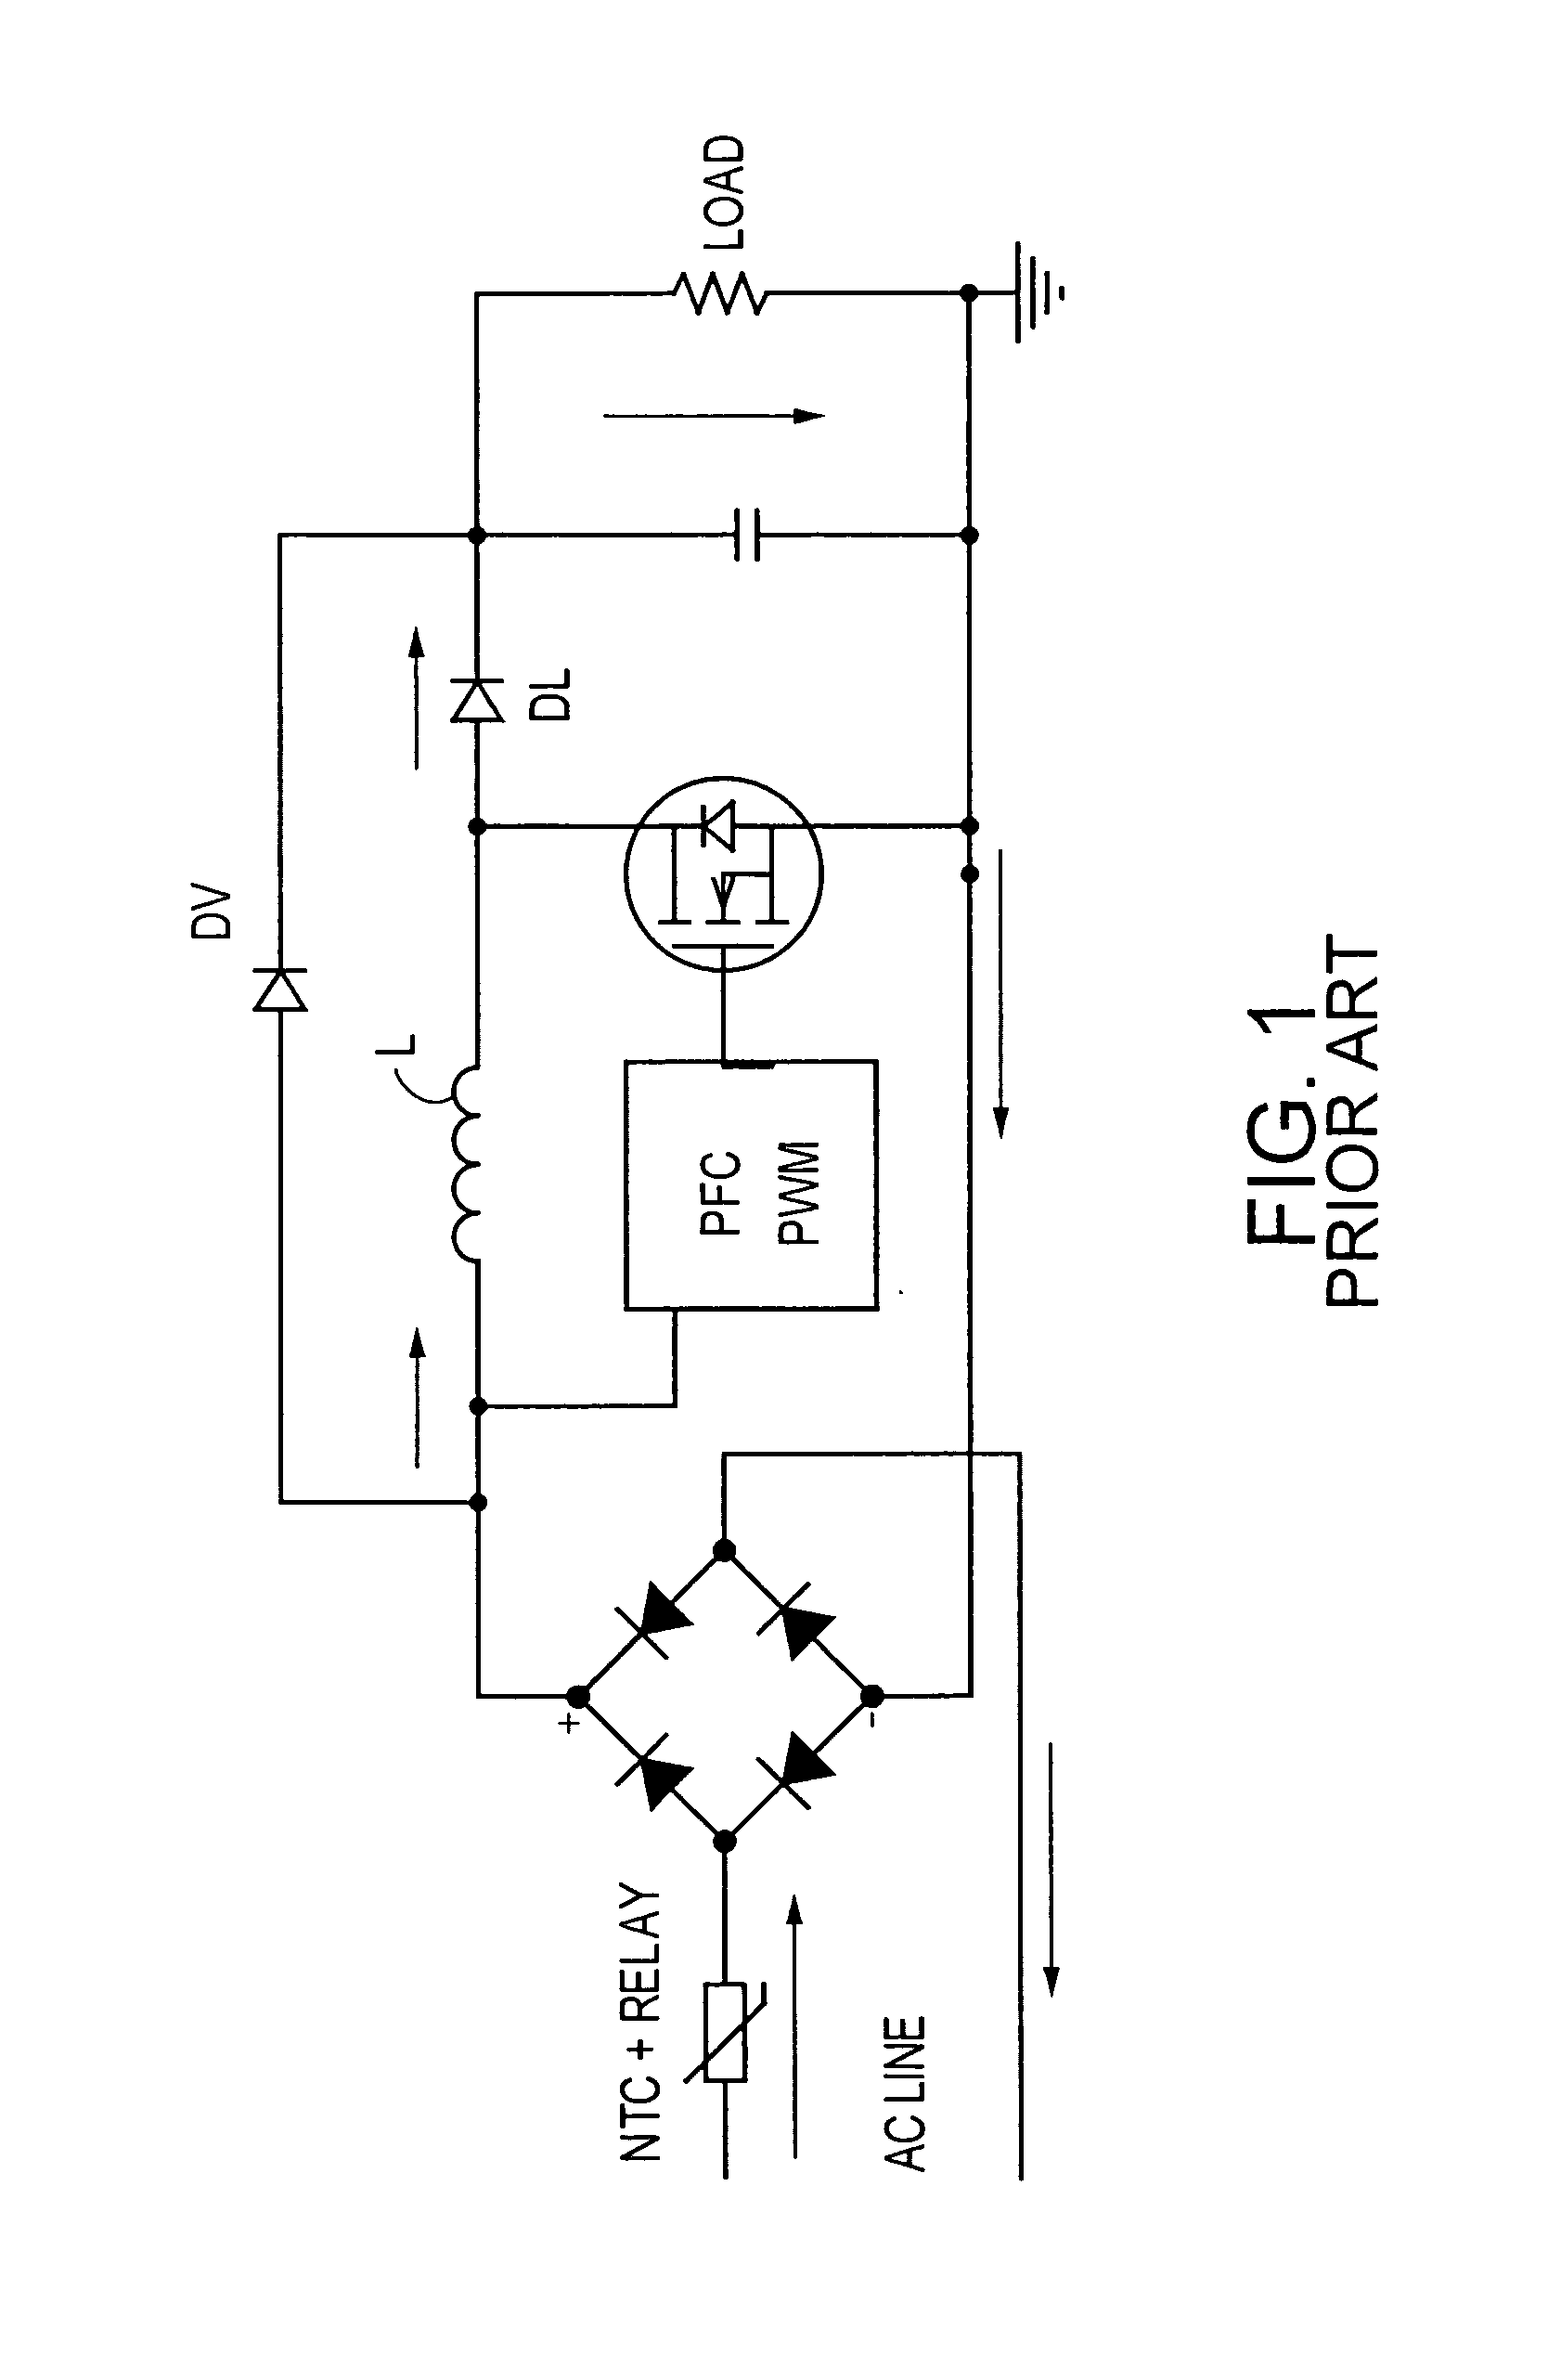 Bridge-less boost (BLB) power factor correction topology controlled with one cycle control